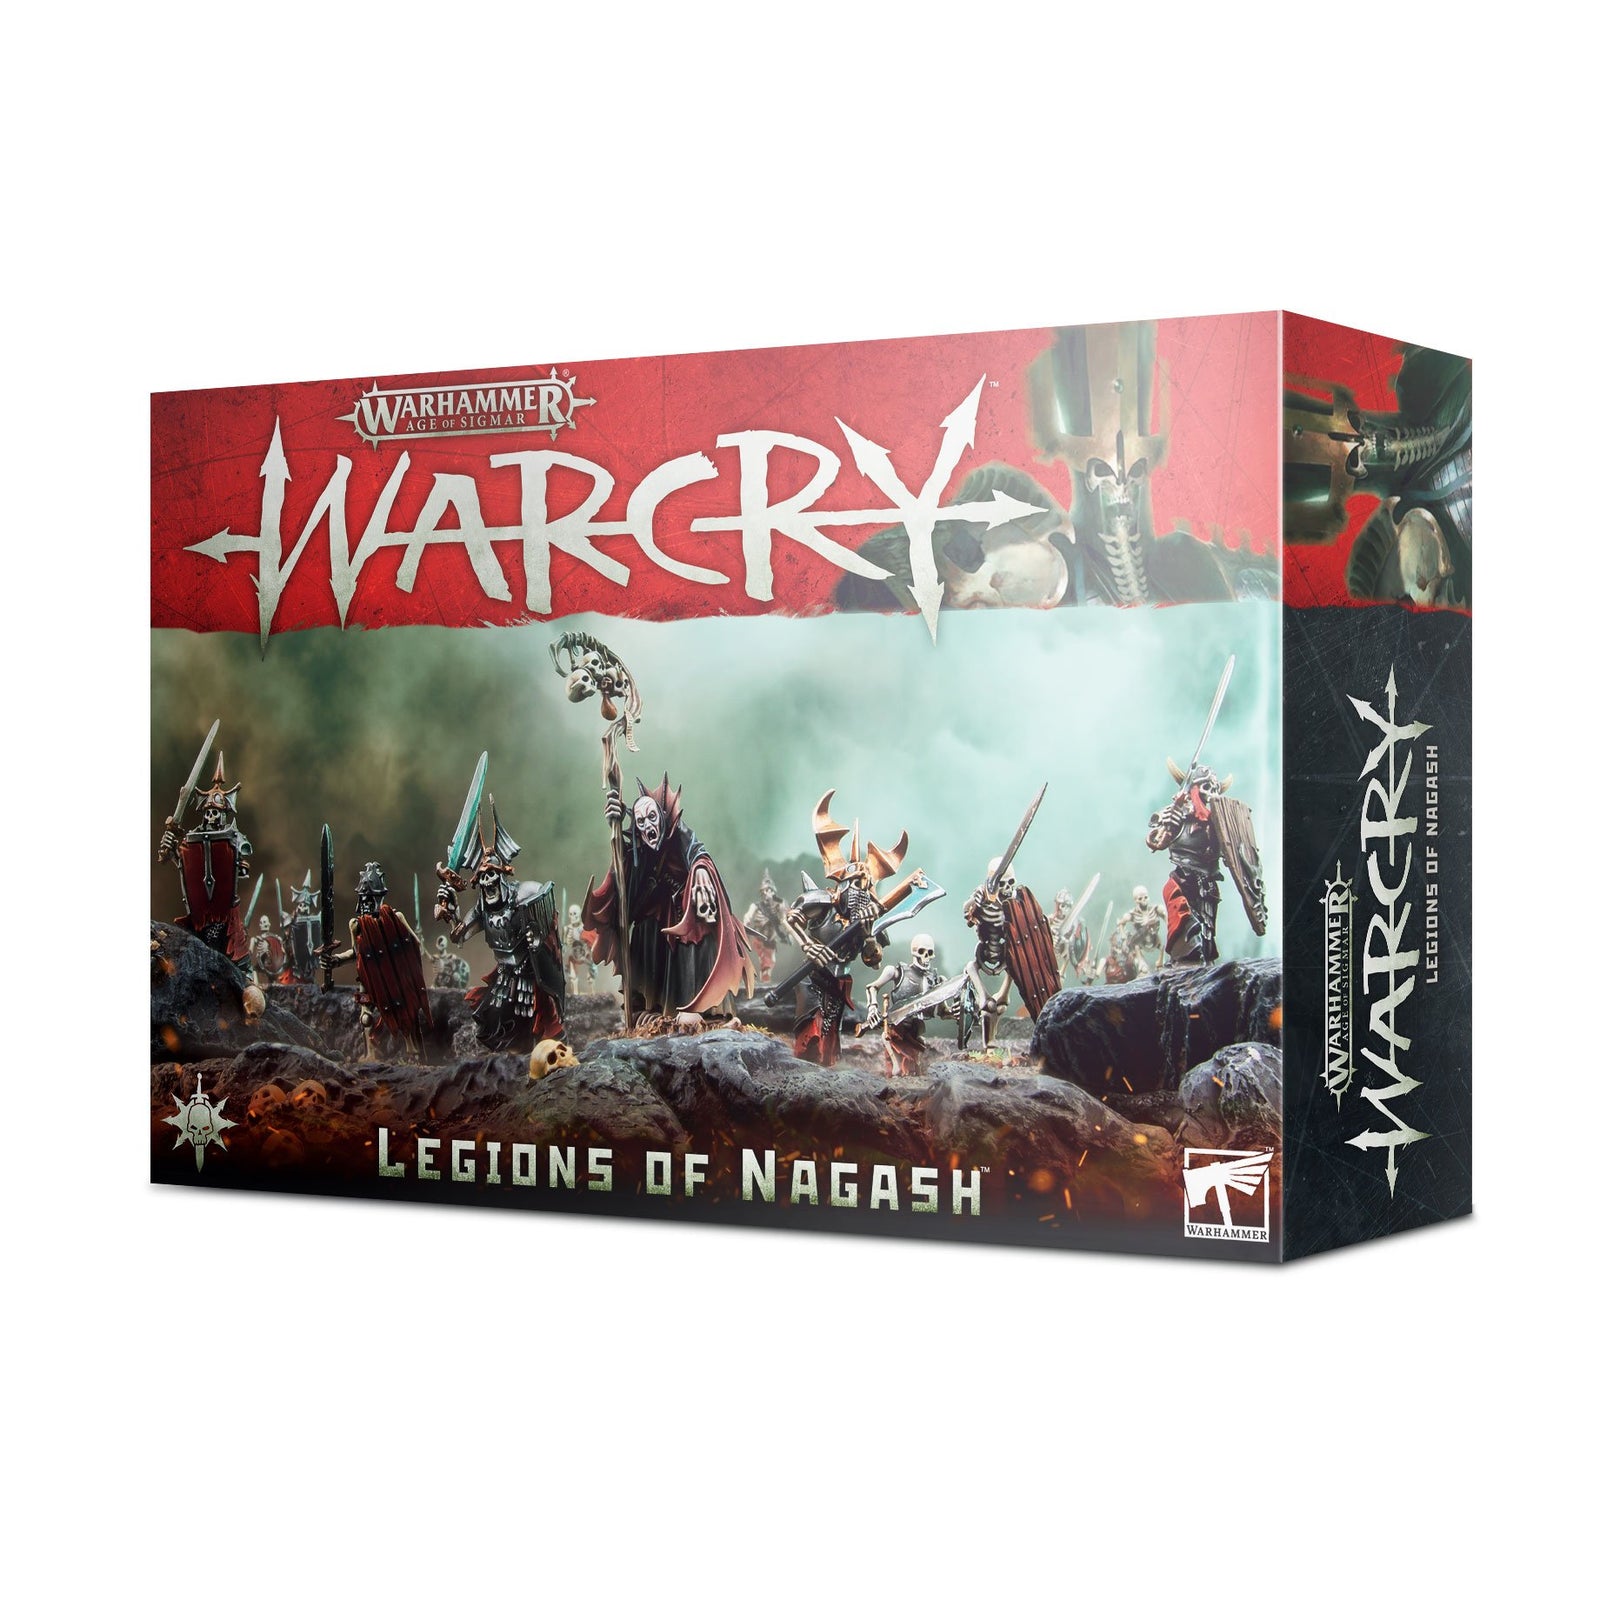 Box image for Warcry: Legions of Nagash